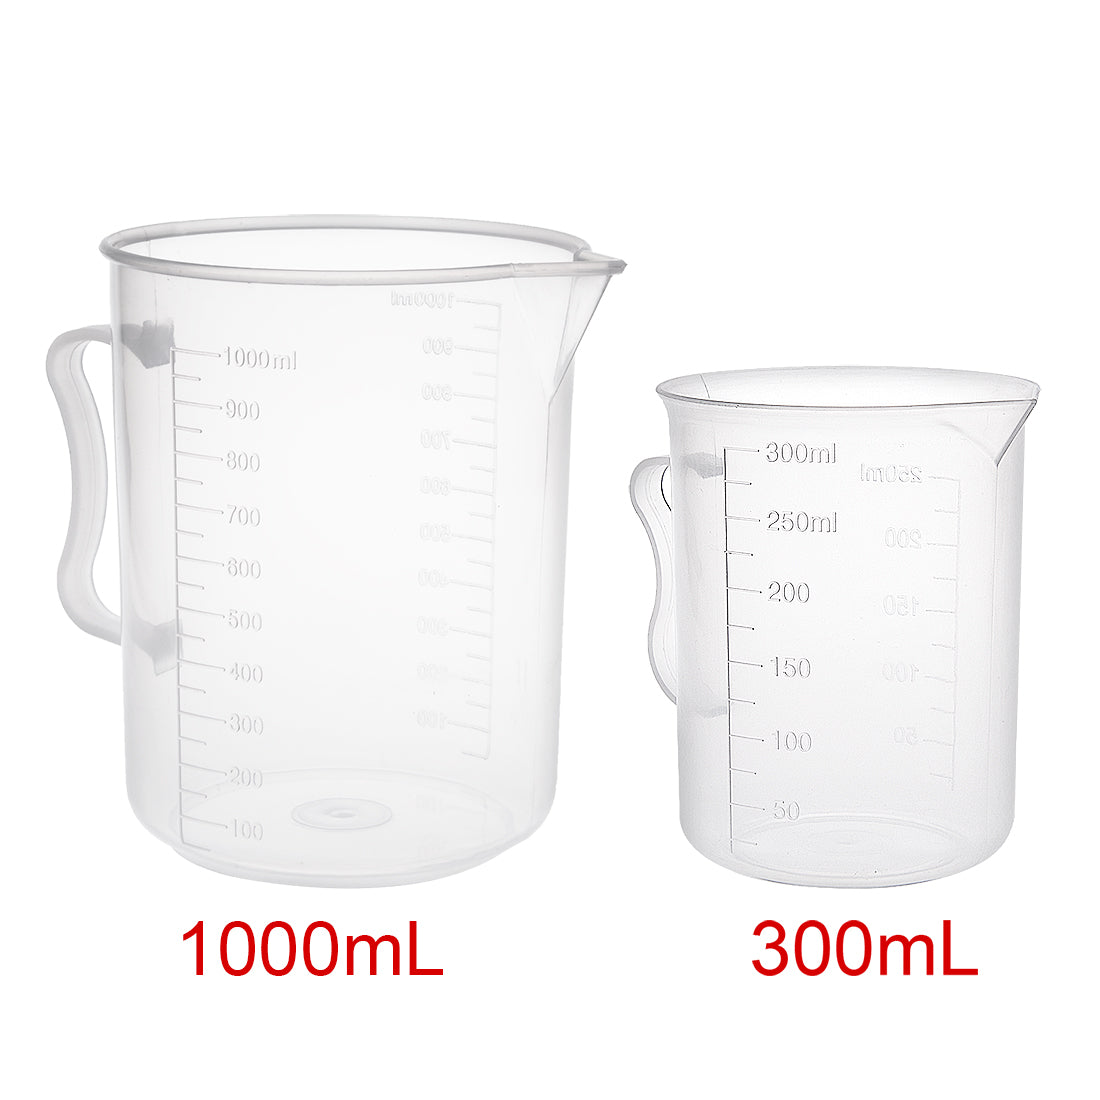 uxcell Uxcell Laboratory Clear White PP Measuring Cup Handled Beaker 300mL 1000mL Set of 3